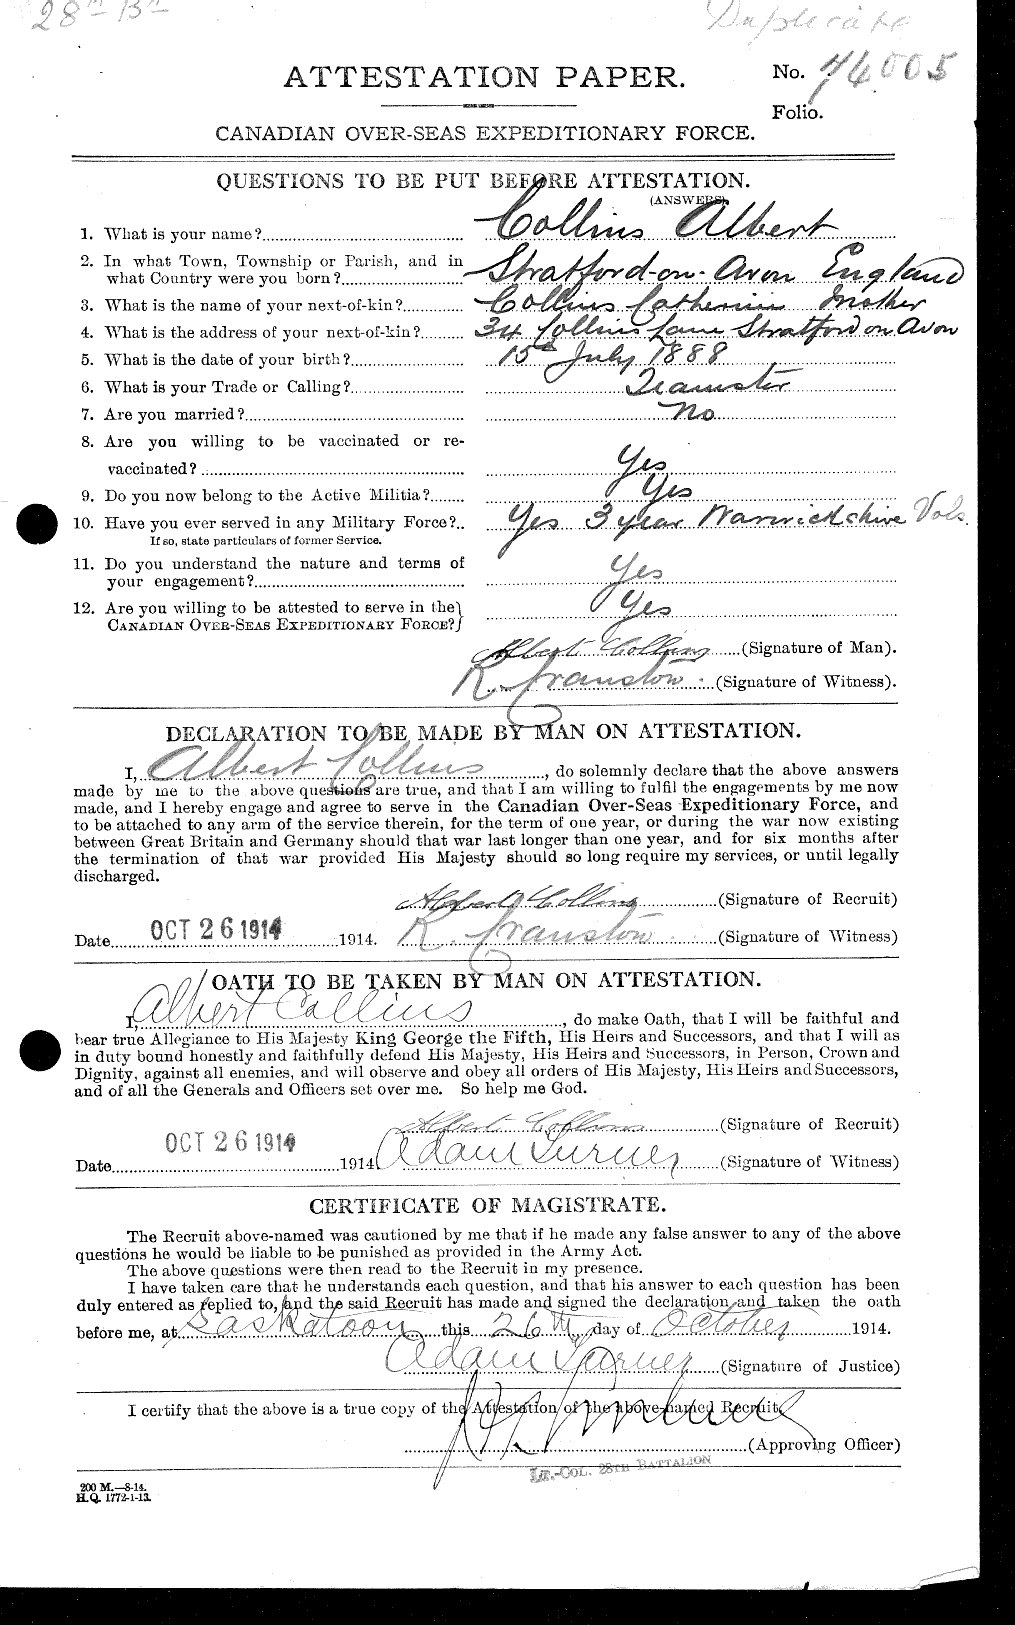 Personnel Records of the First World War - CEF 028917a